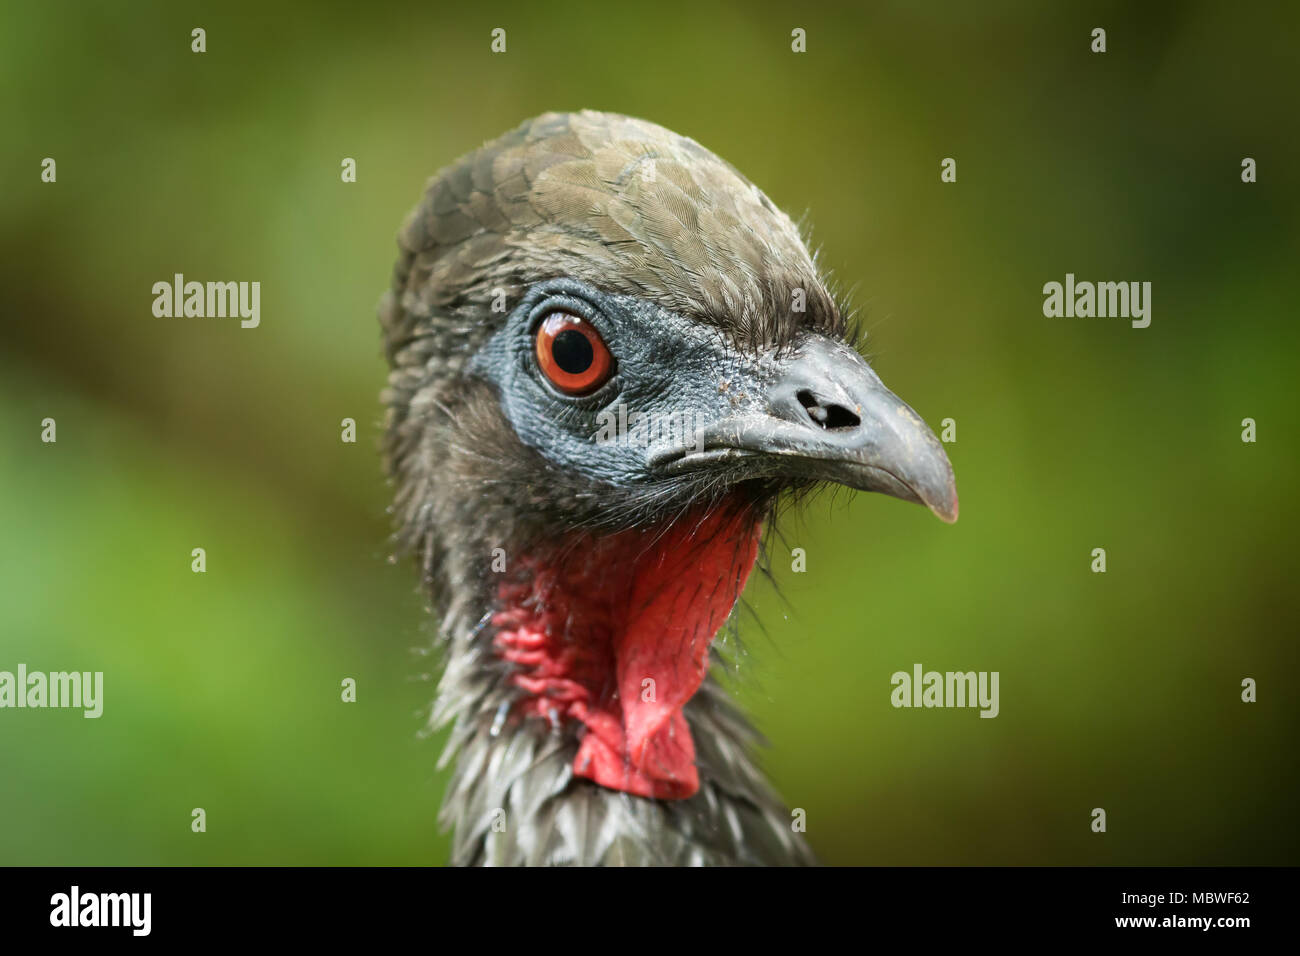 Crested Guan Head closeup on green background Stock Photo